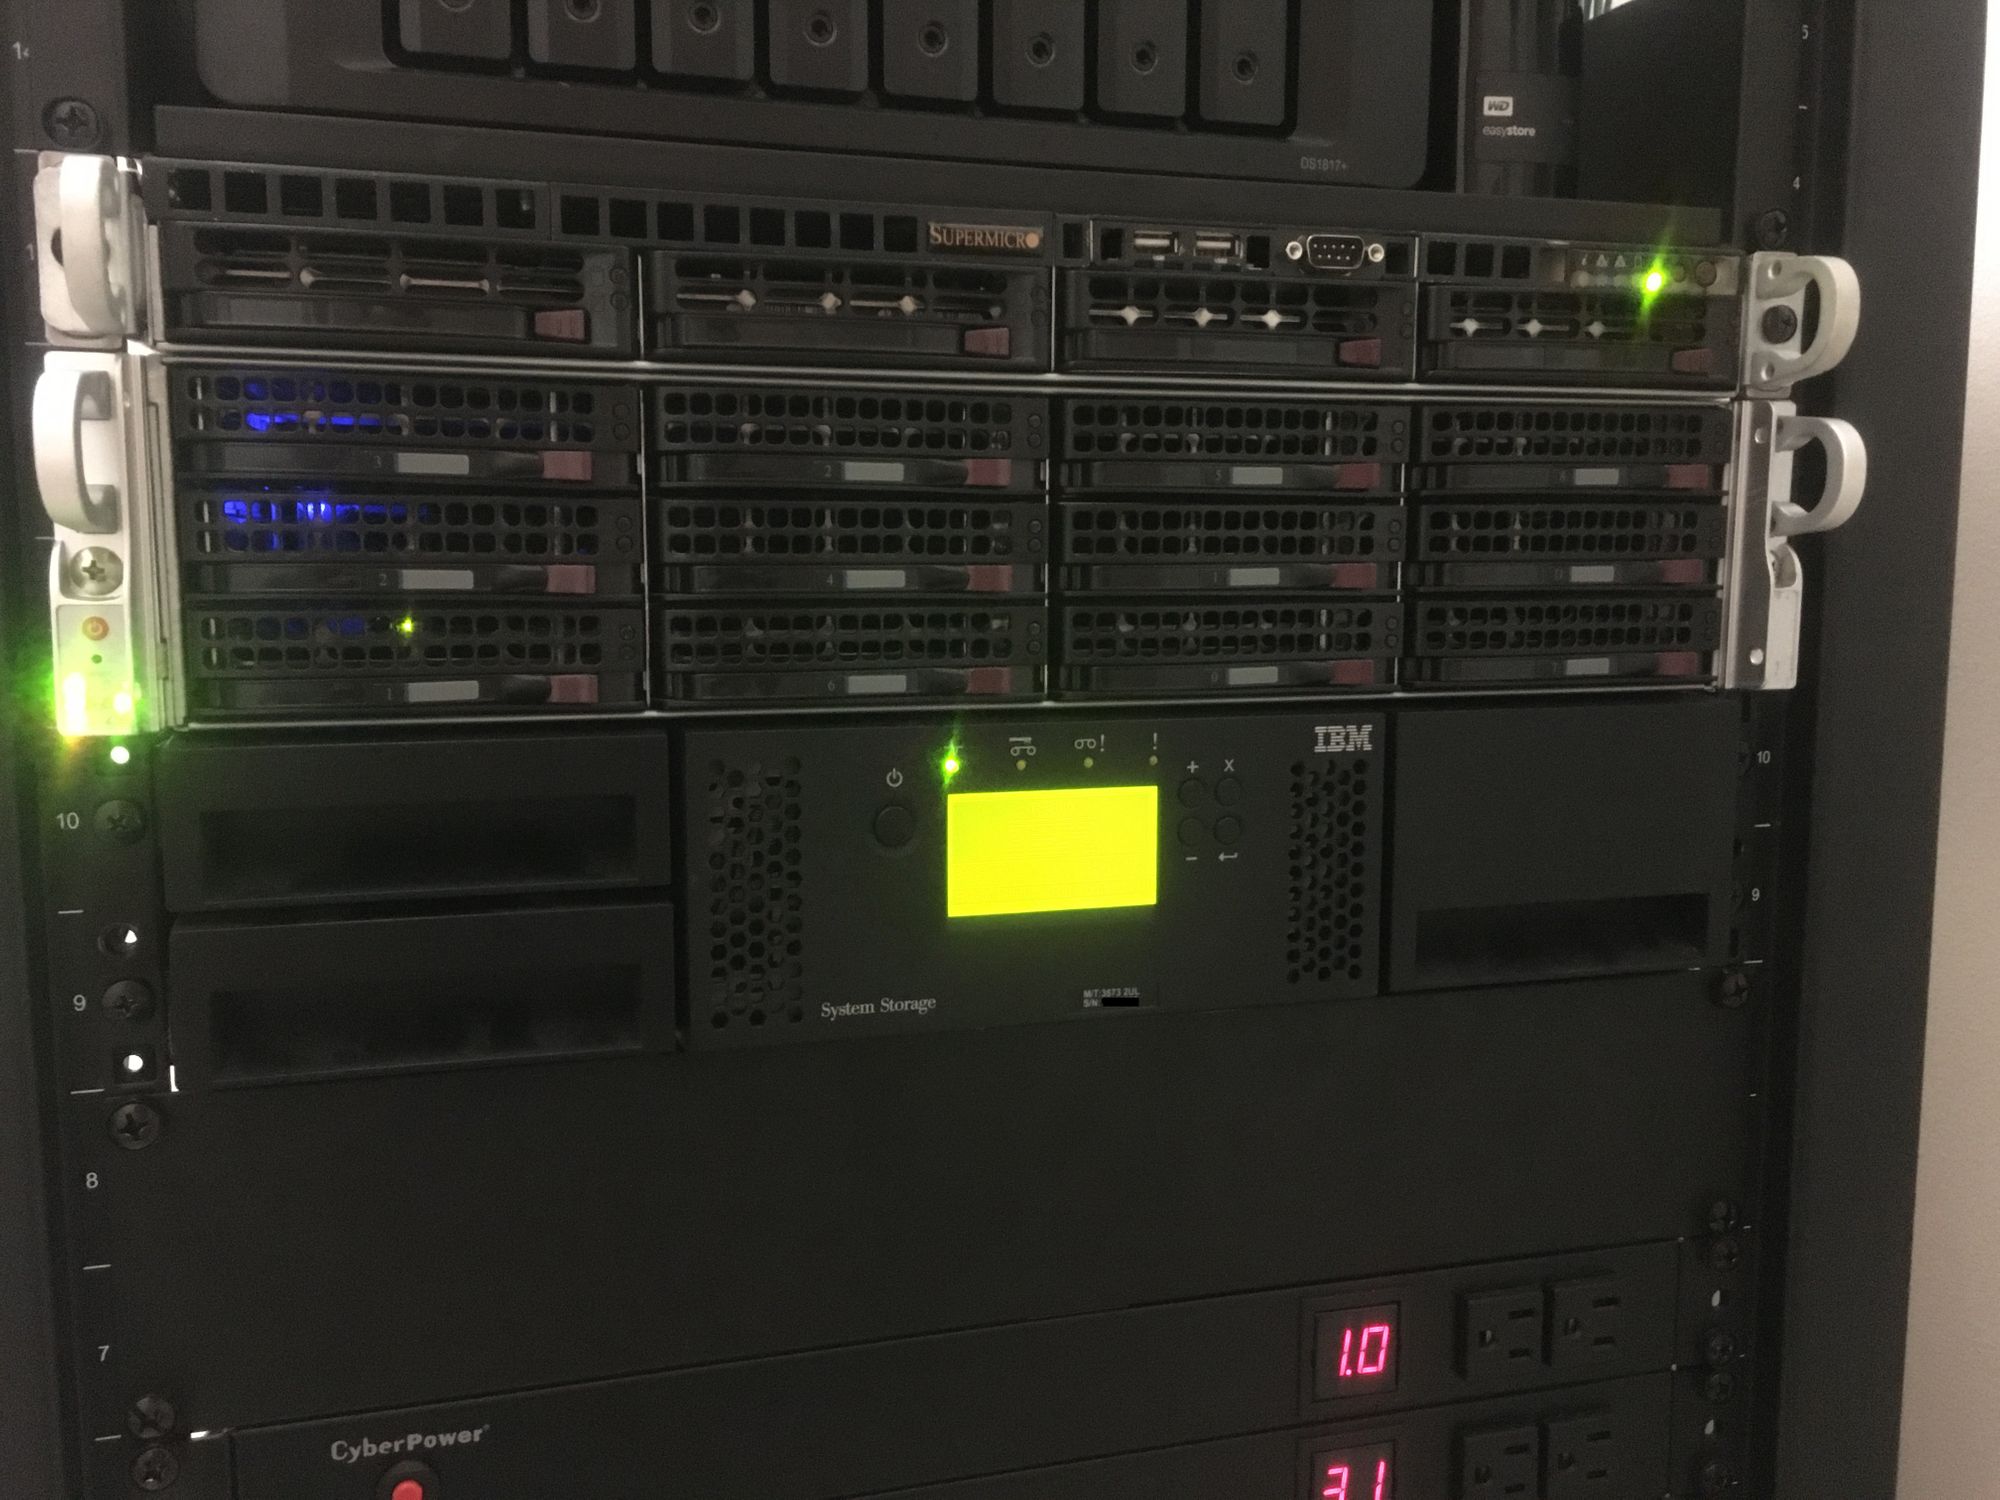 Archiving data to LTO Tape for long term storage and backups